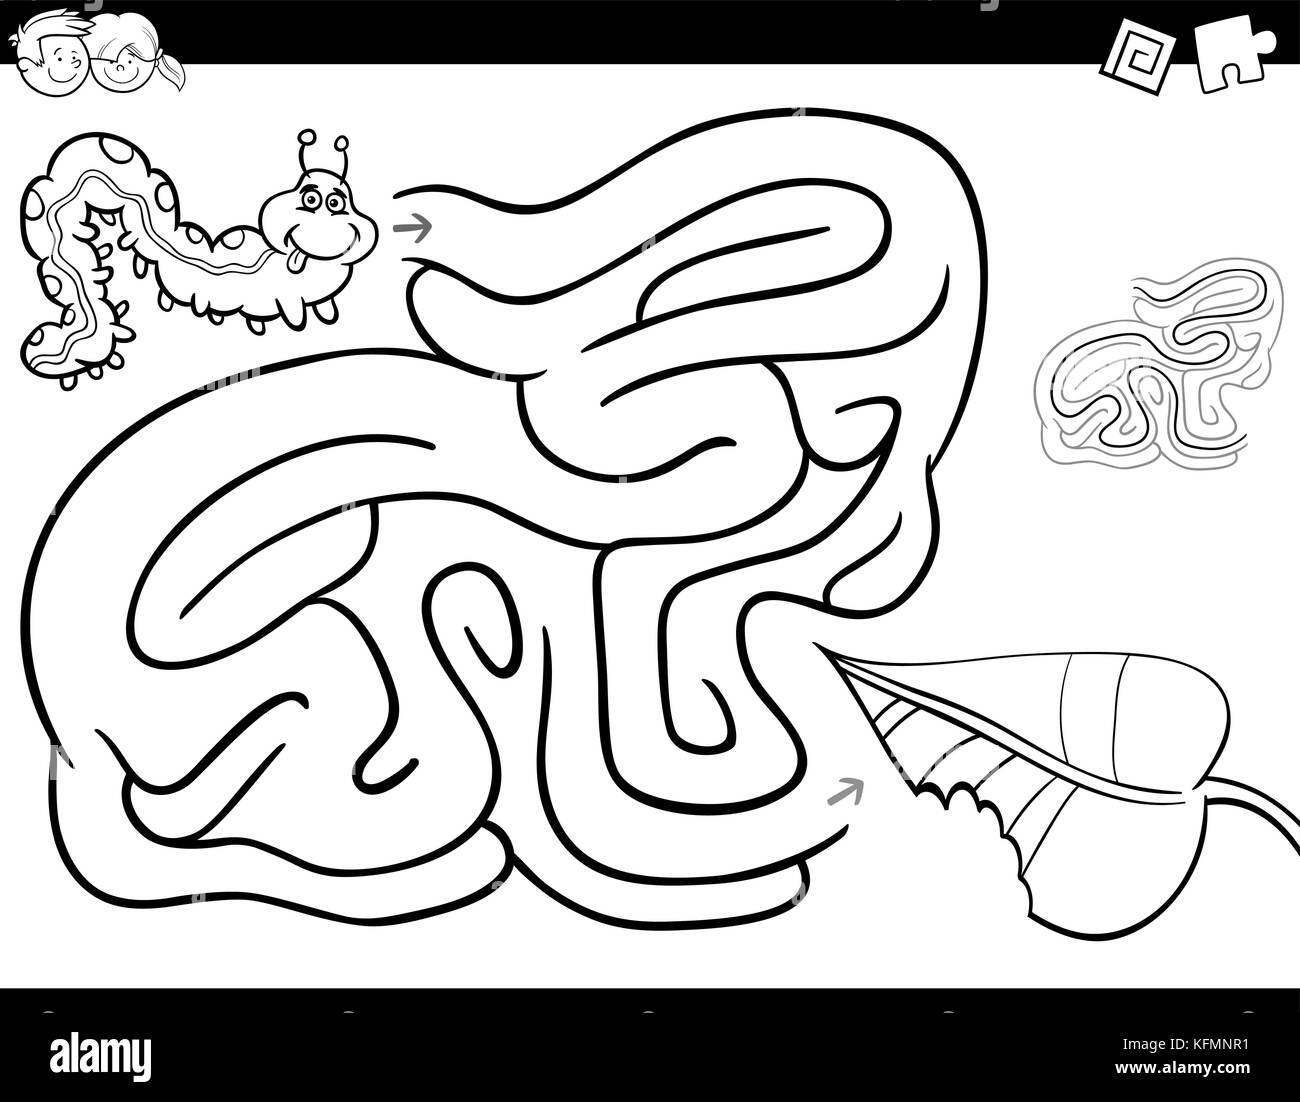 Black and White Cartoon Illustration of Education Maze or Labyrinth Activity Game for Children with Caterpillar Insect Character and Leaf Coloring Boo Stock Vector